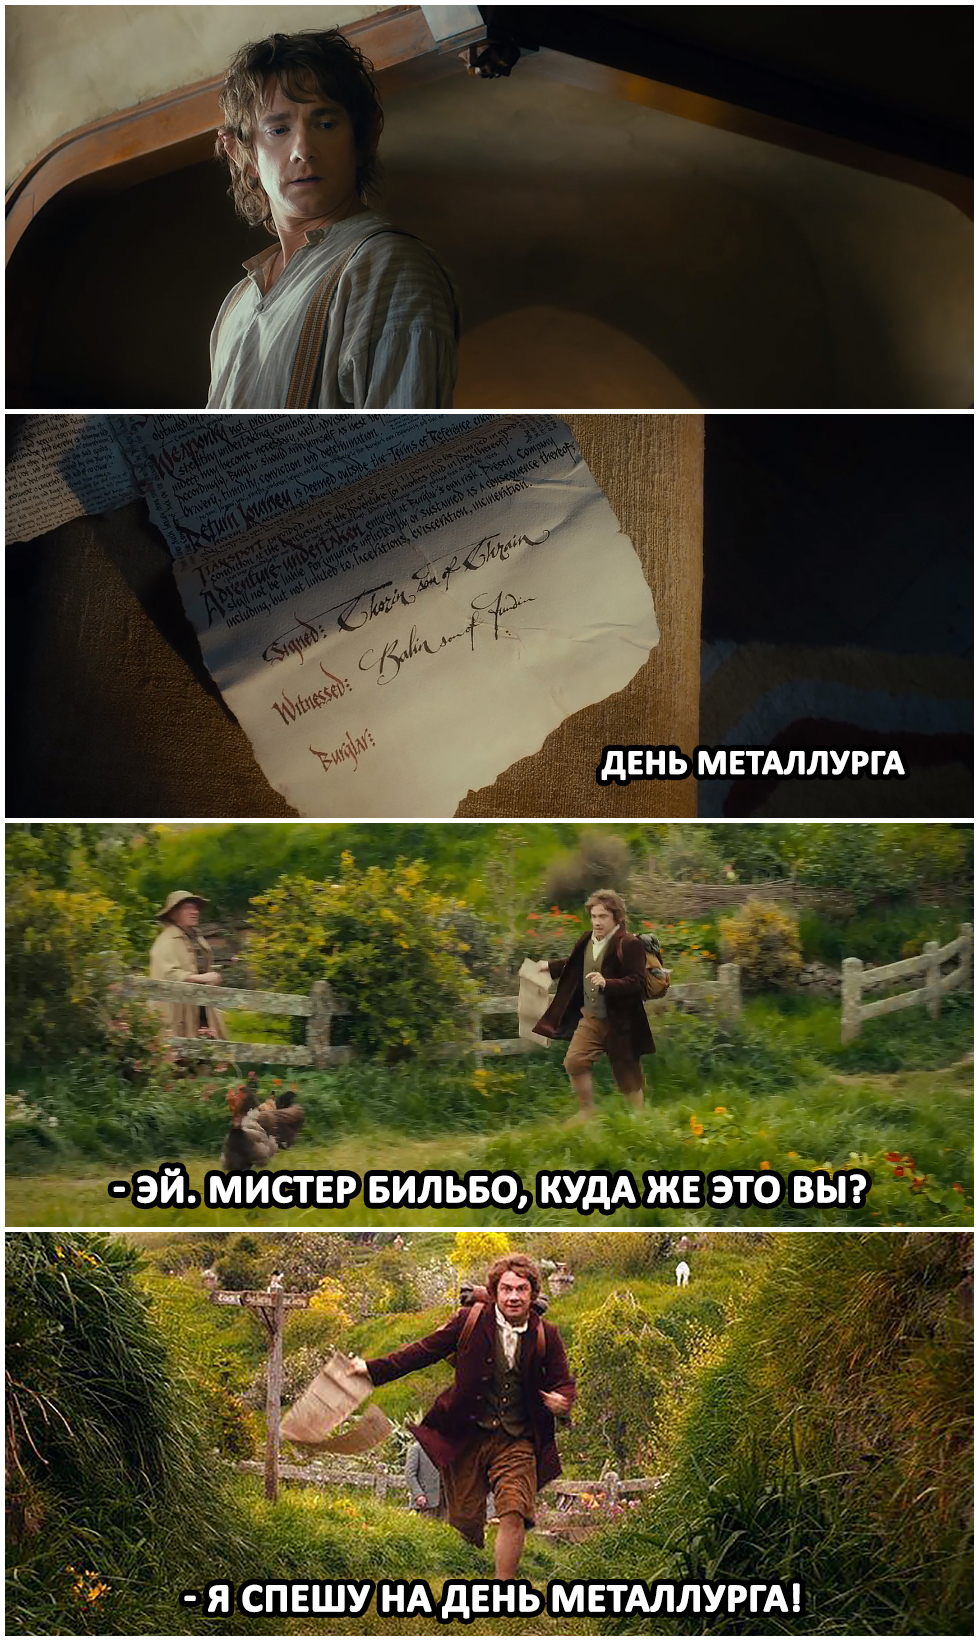 Metallurgist's Day - My, Images, The photo, Screenshot, Memes, Picture with text, Movies, The Hobbit: An Unexpected Journey, Metallurgist Day